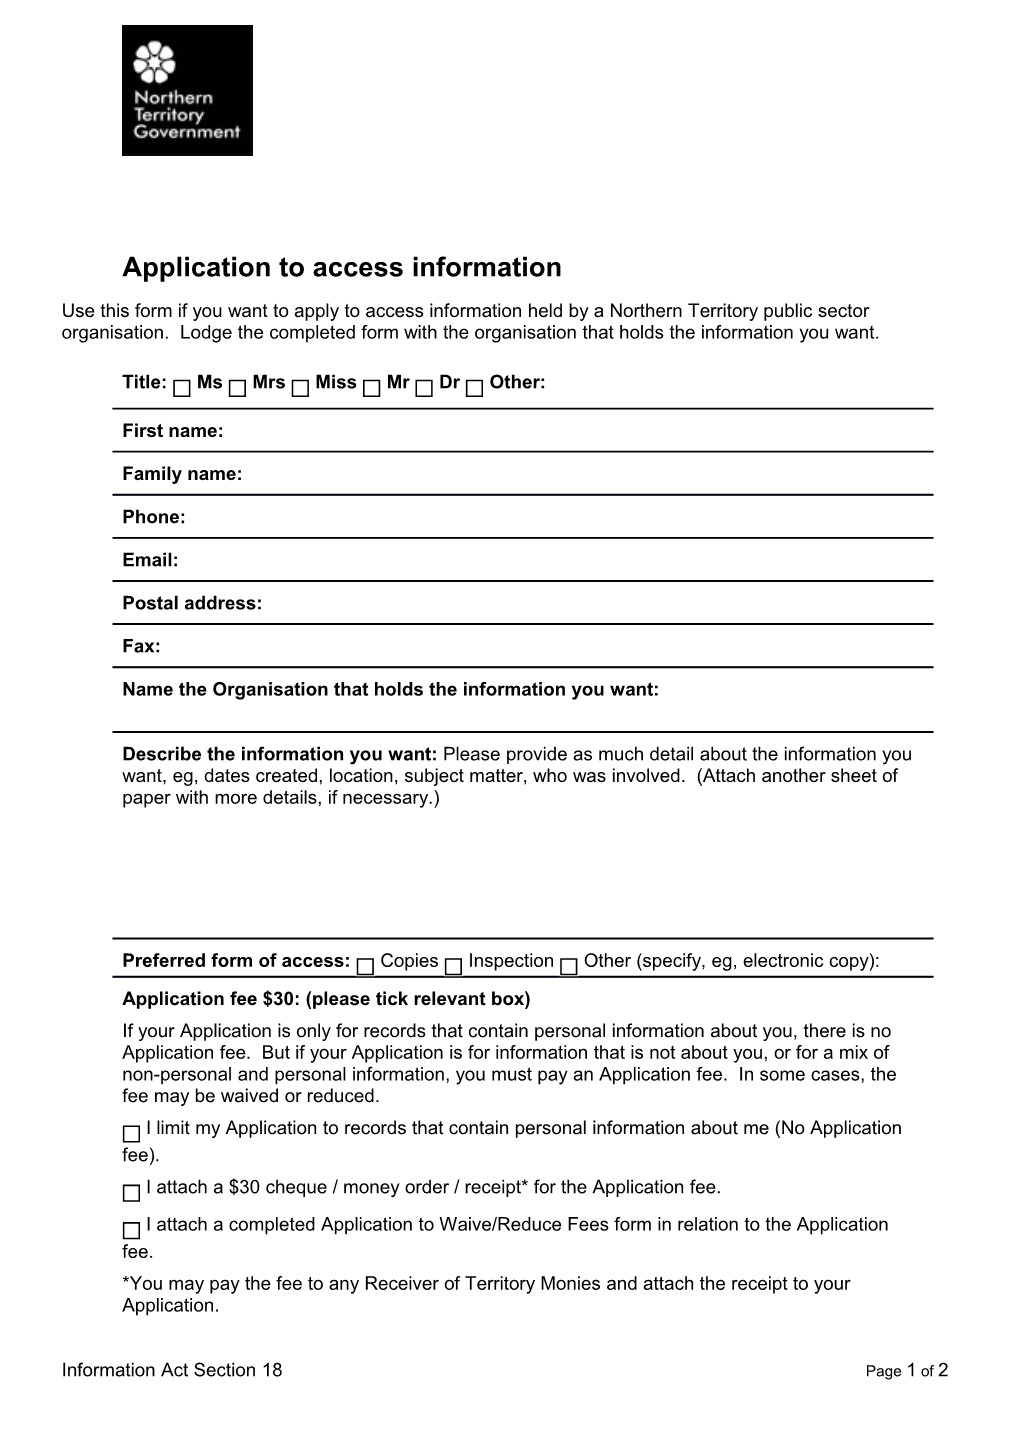 Application to Access Information